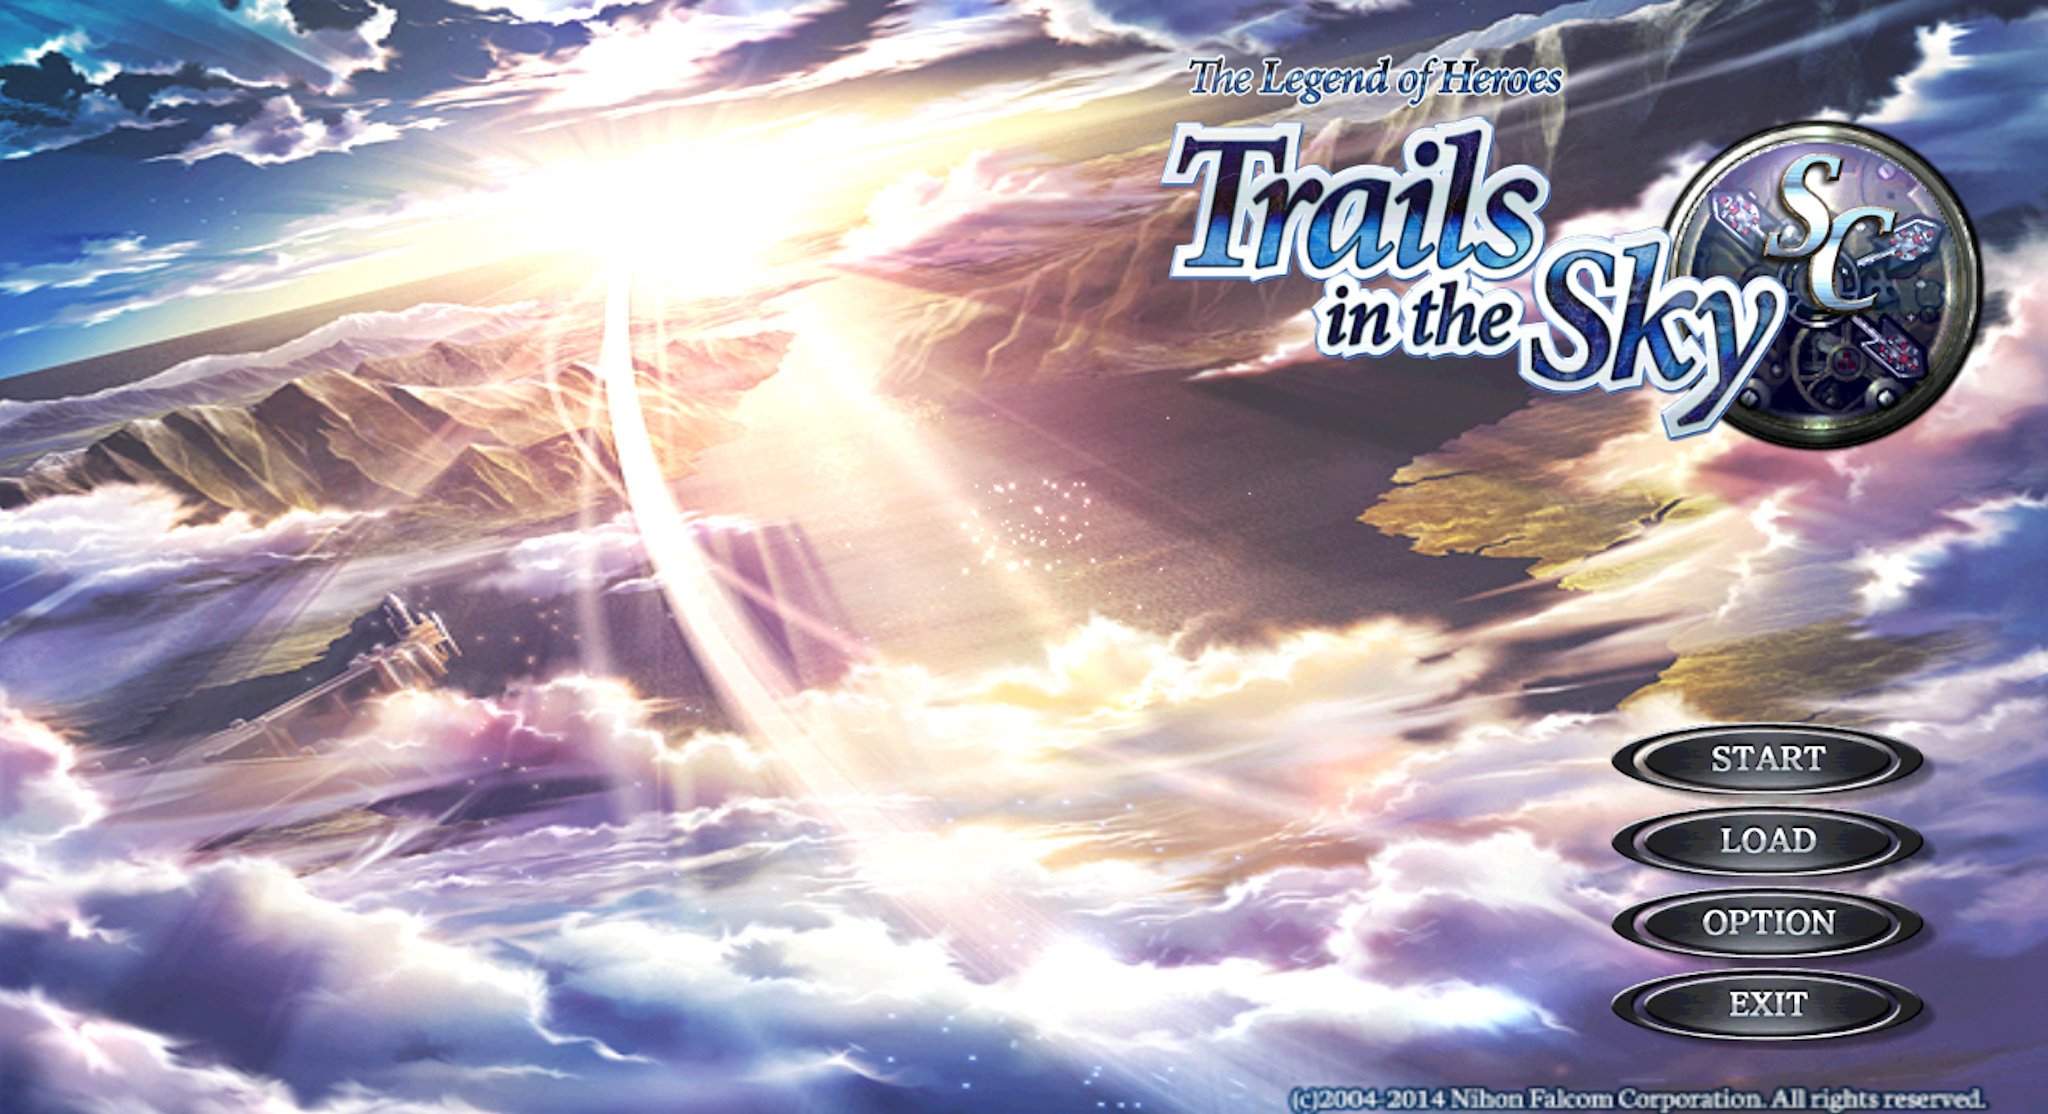 Legend-of-Heroes-Trails-in-the-Sky-Second-Chapter-title-main.jpg